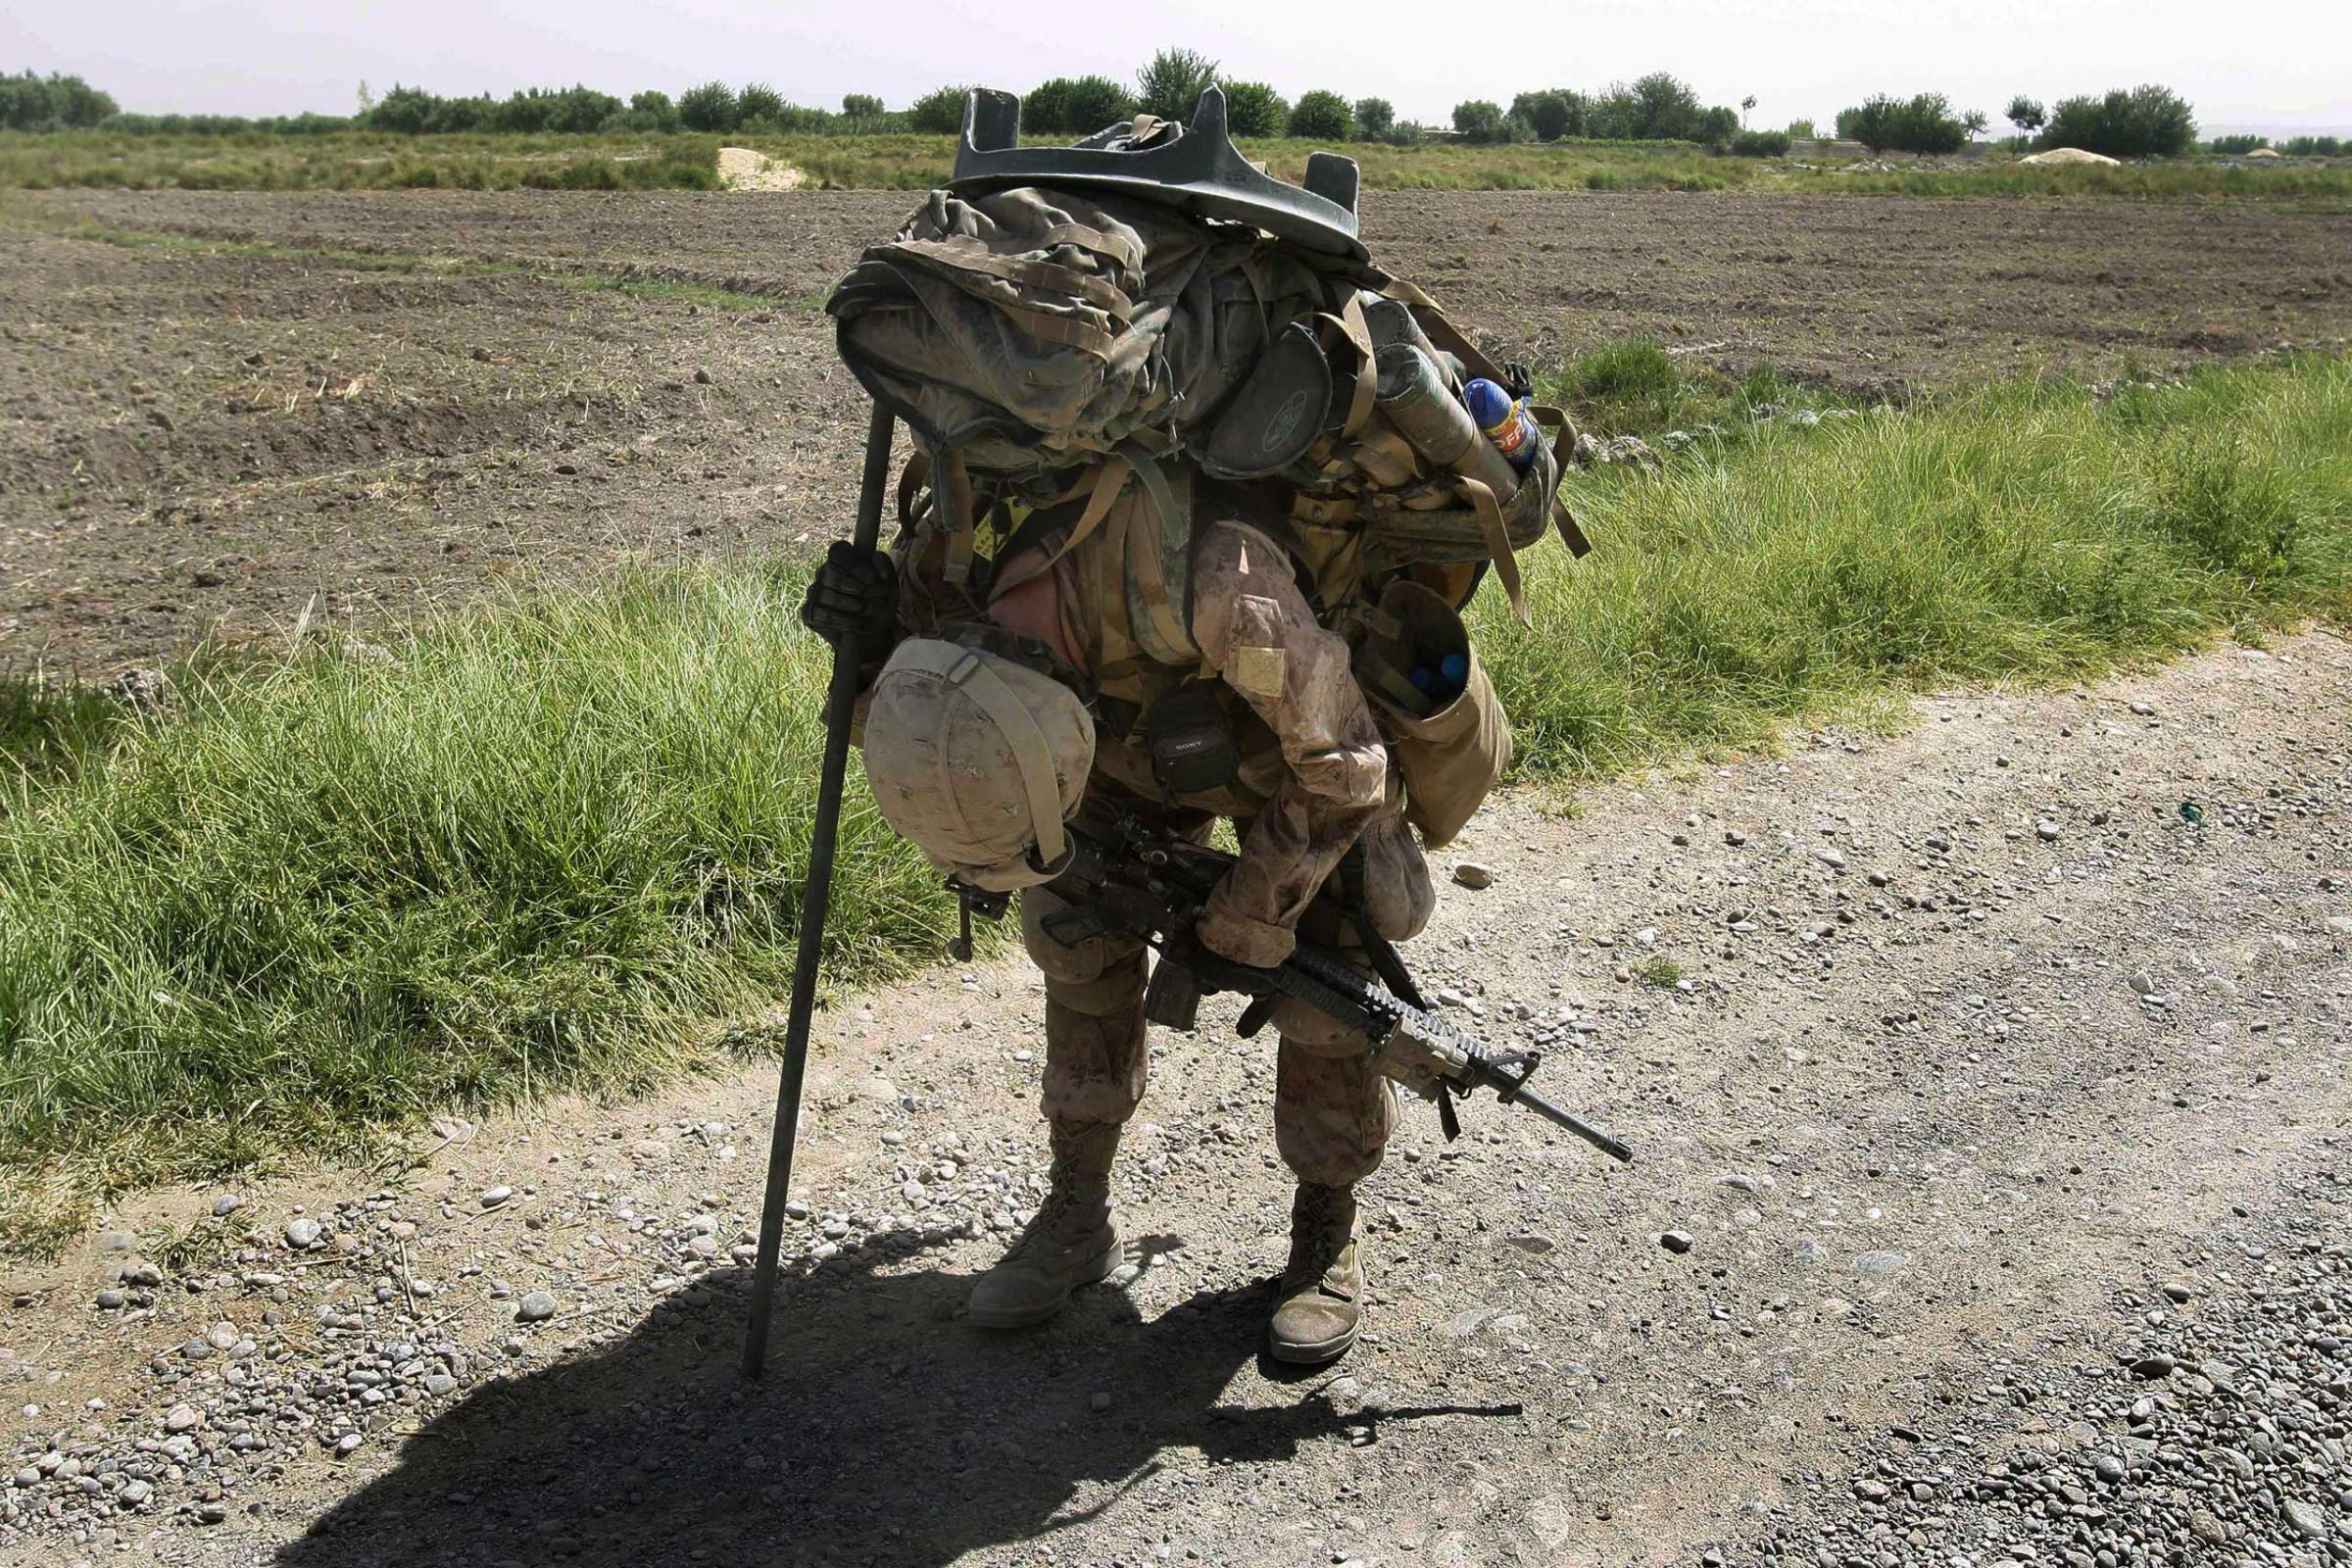 U.S. Marine Cpl. Brian Knight, of Cincinnati, Ohio, with the 2nd Marine Expeditionary Brigade, 1st Battalion 5th Marines, pauses briefly in the heat to rest with his heavy pack filled with mortar equipment, ammunition, food, and water in the Nawa district in Afghanistan's Helmand province Saturday, July 4, 2009.